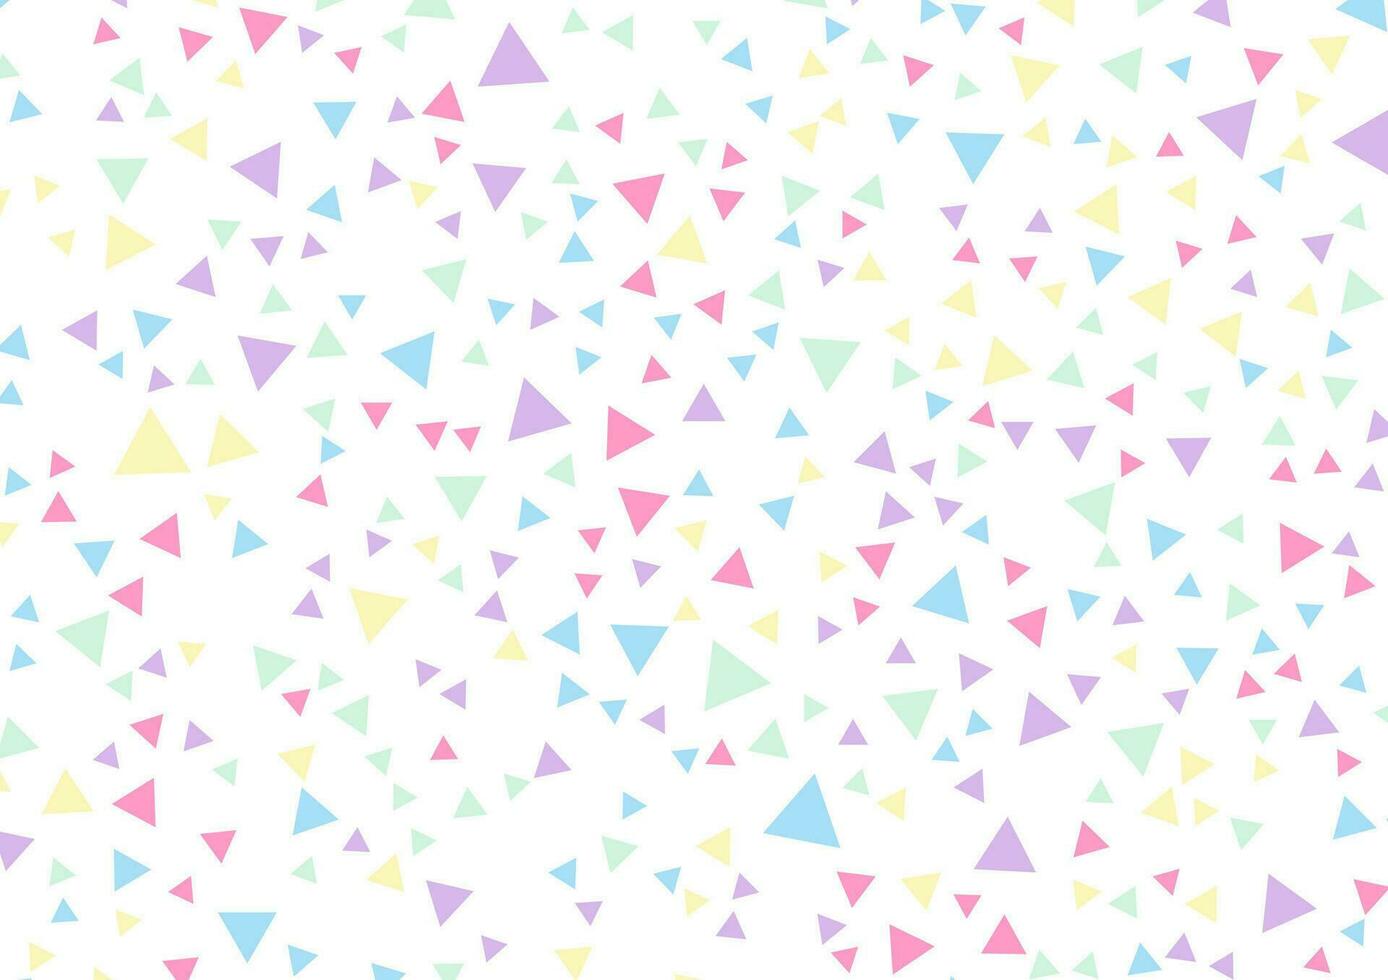 Triangle random cute colorful pattern vivid banner background vector